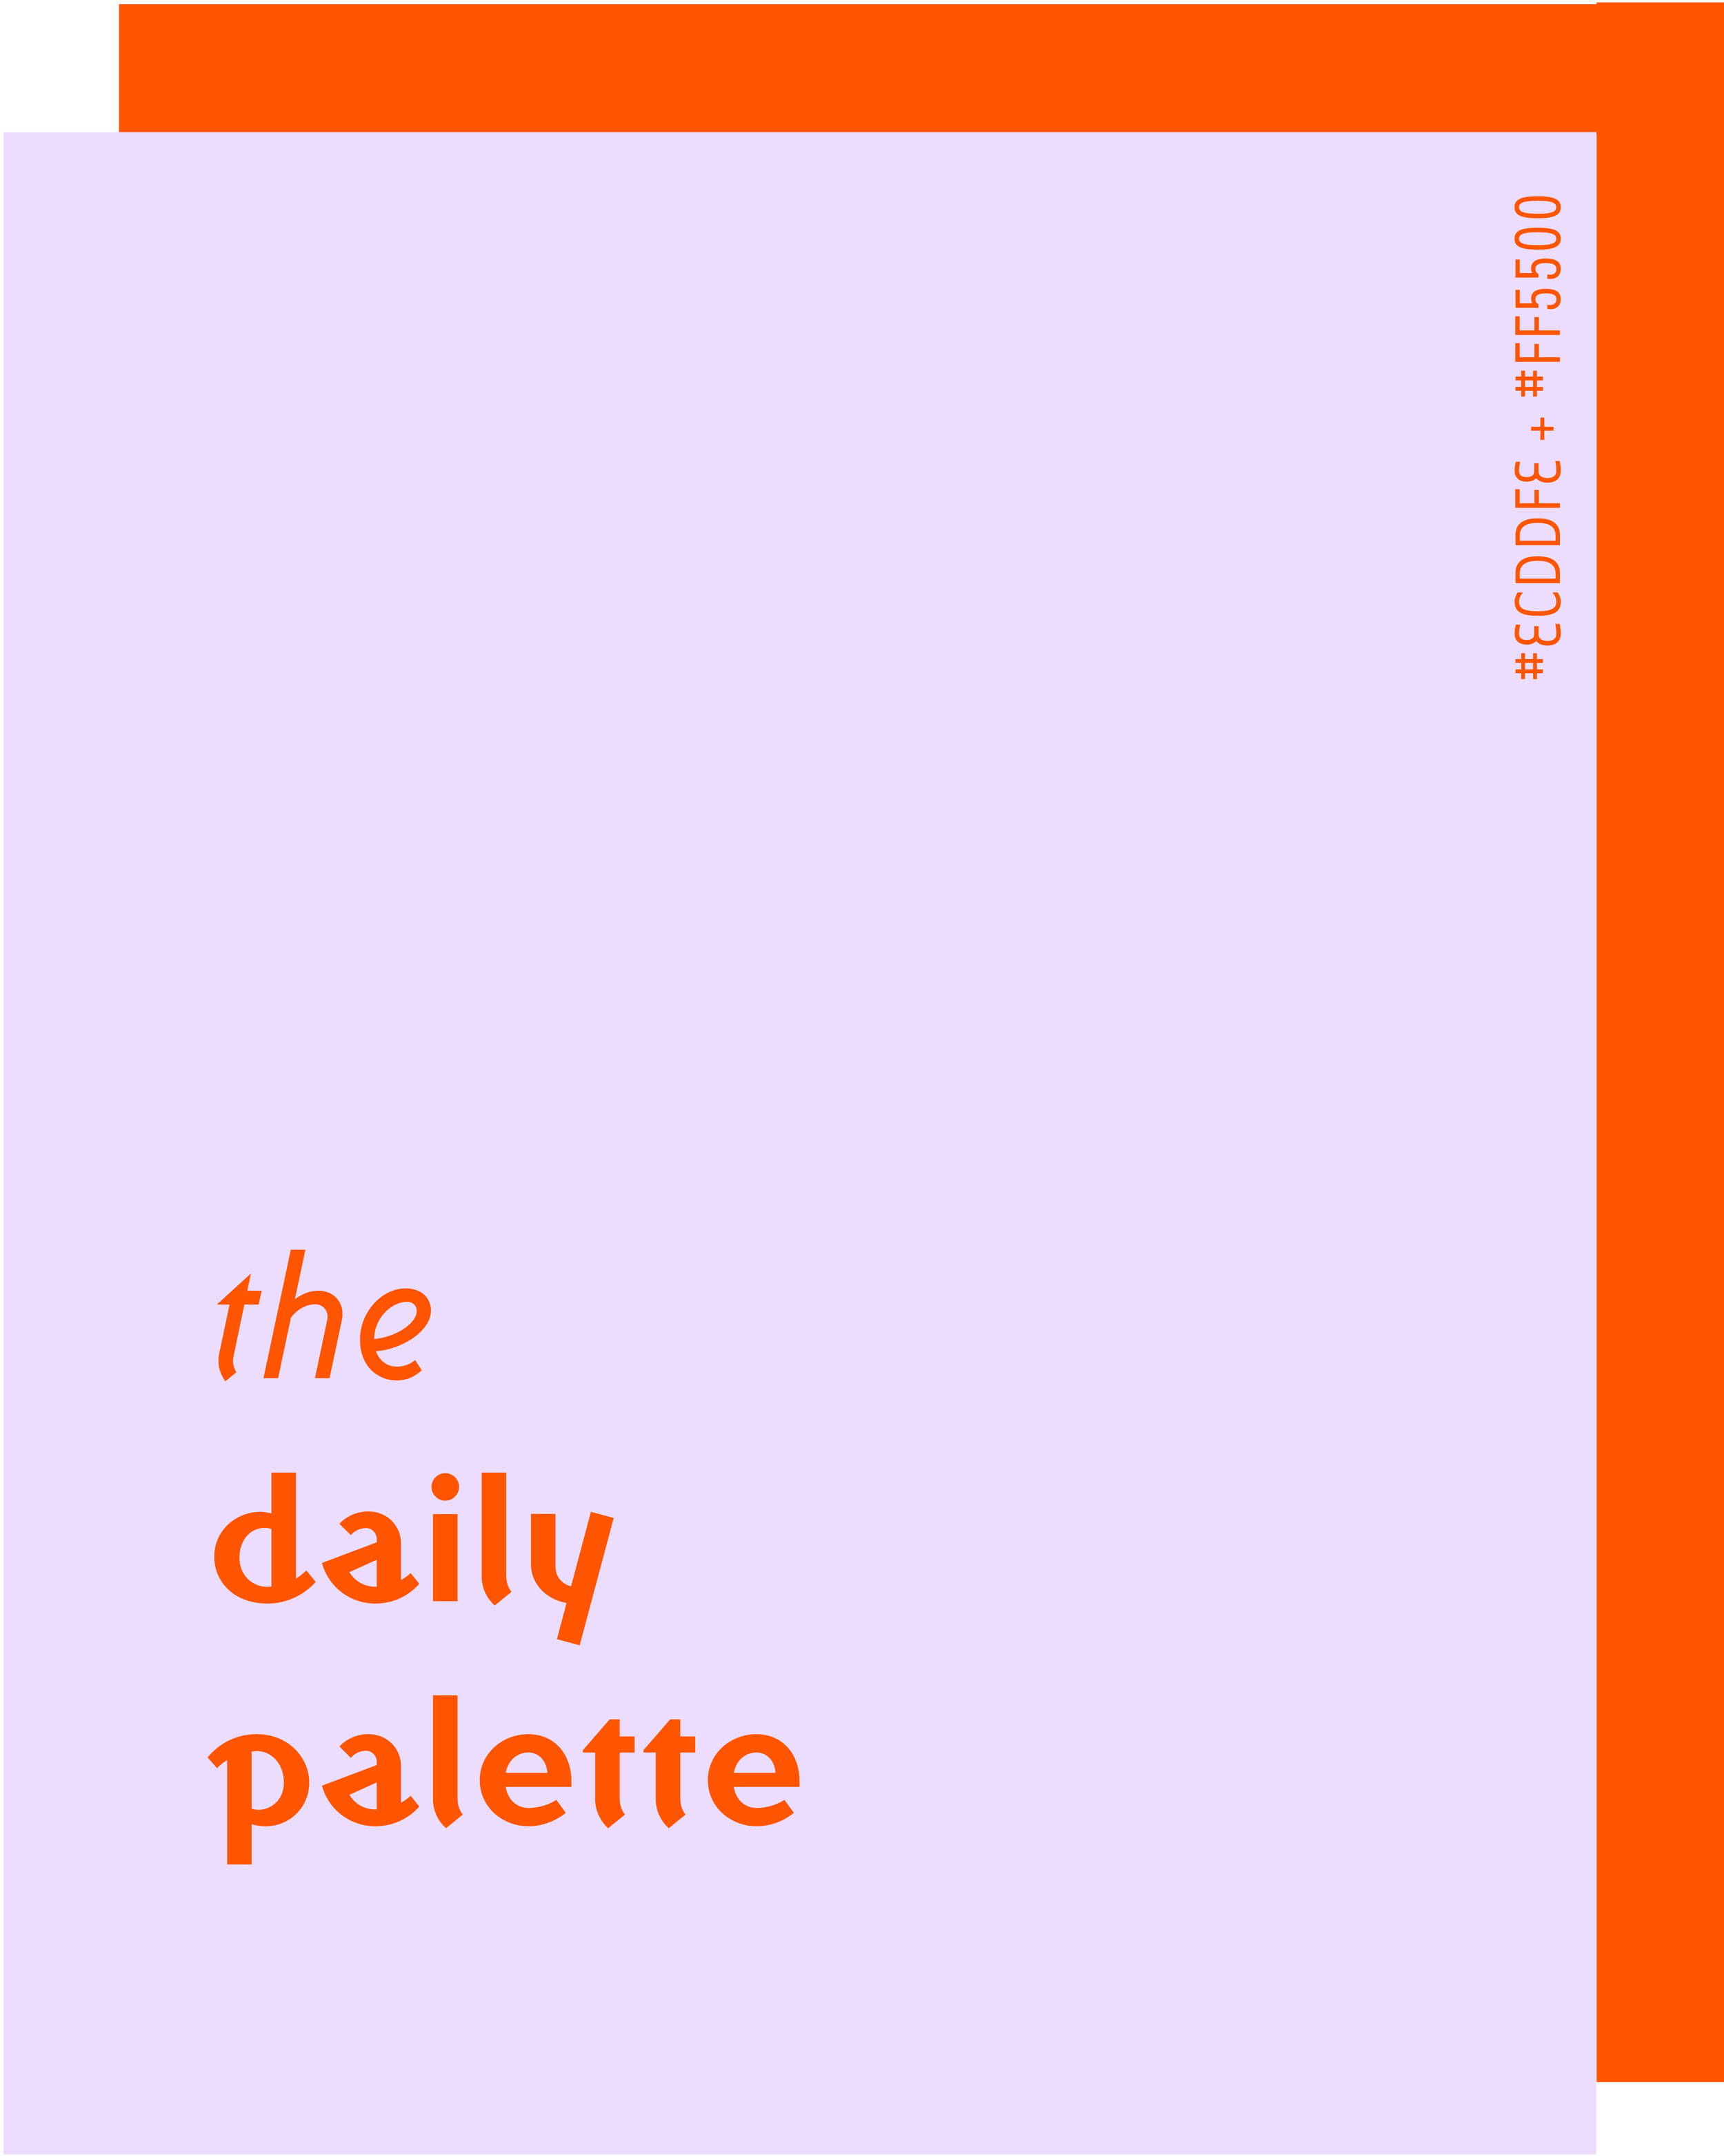 Kaper Design_the Daily Palette Project-27.png